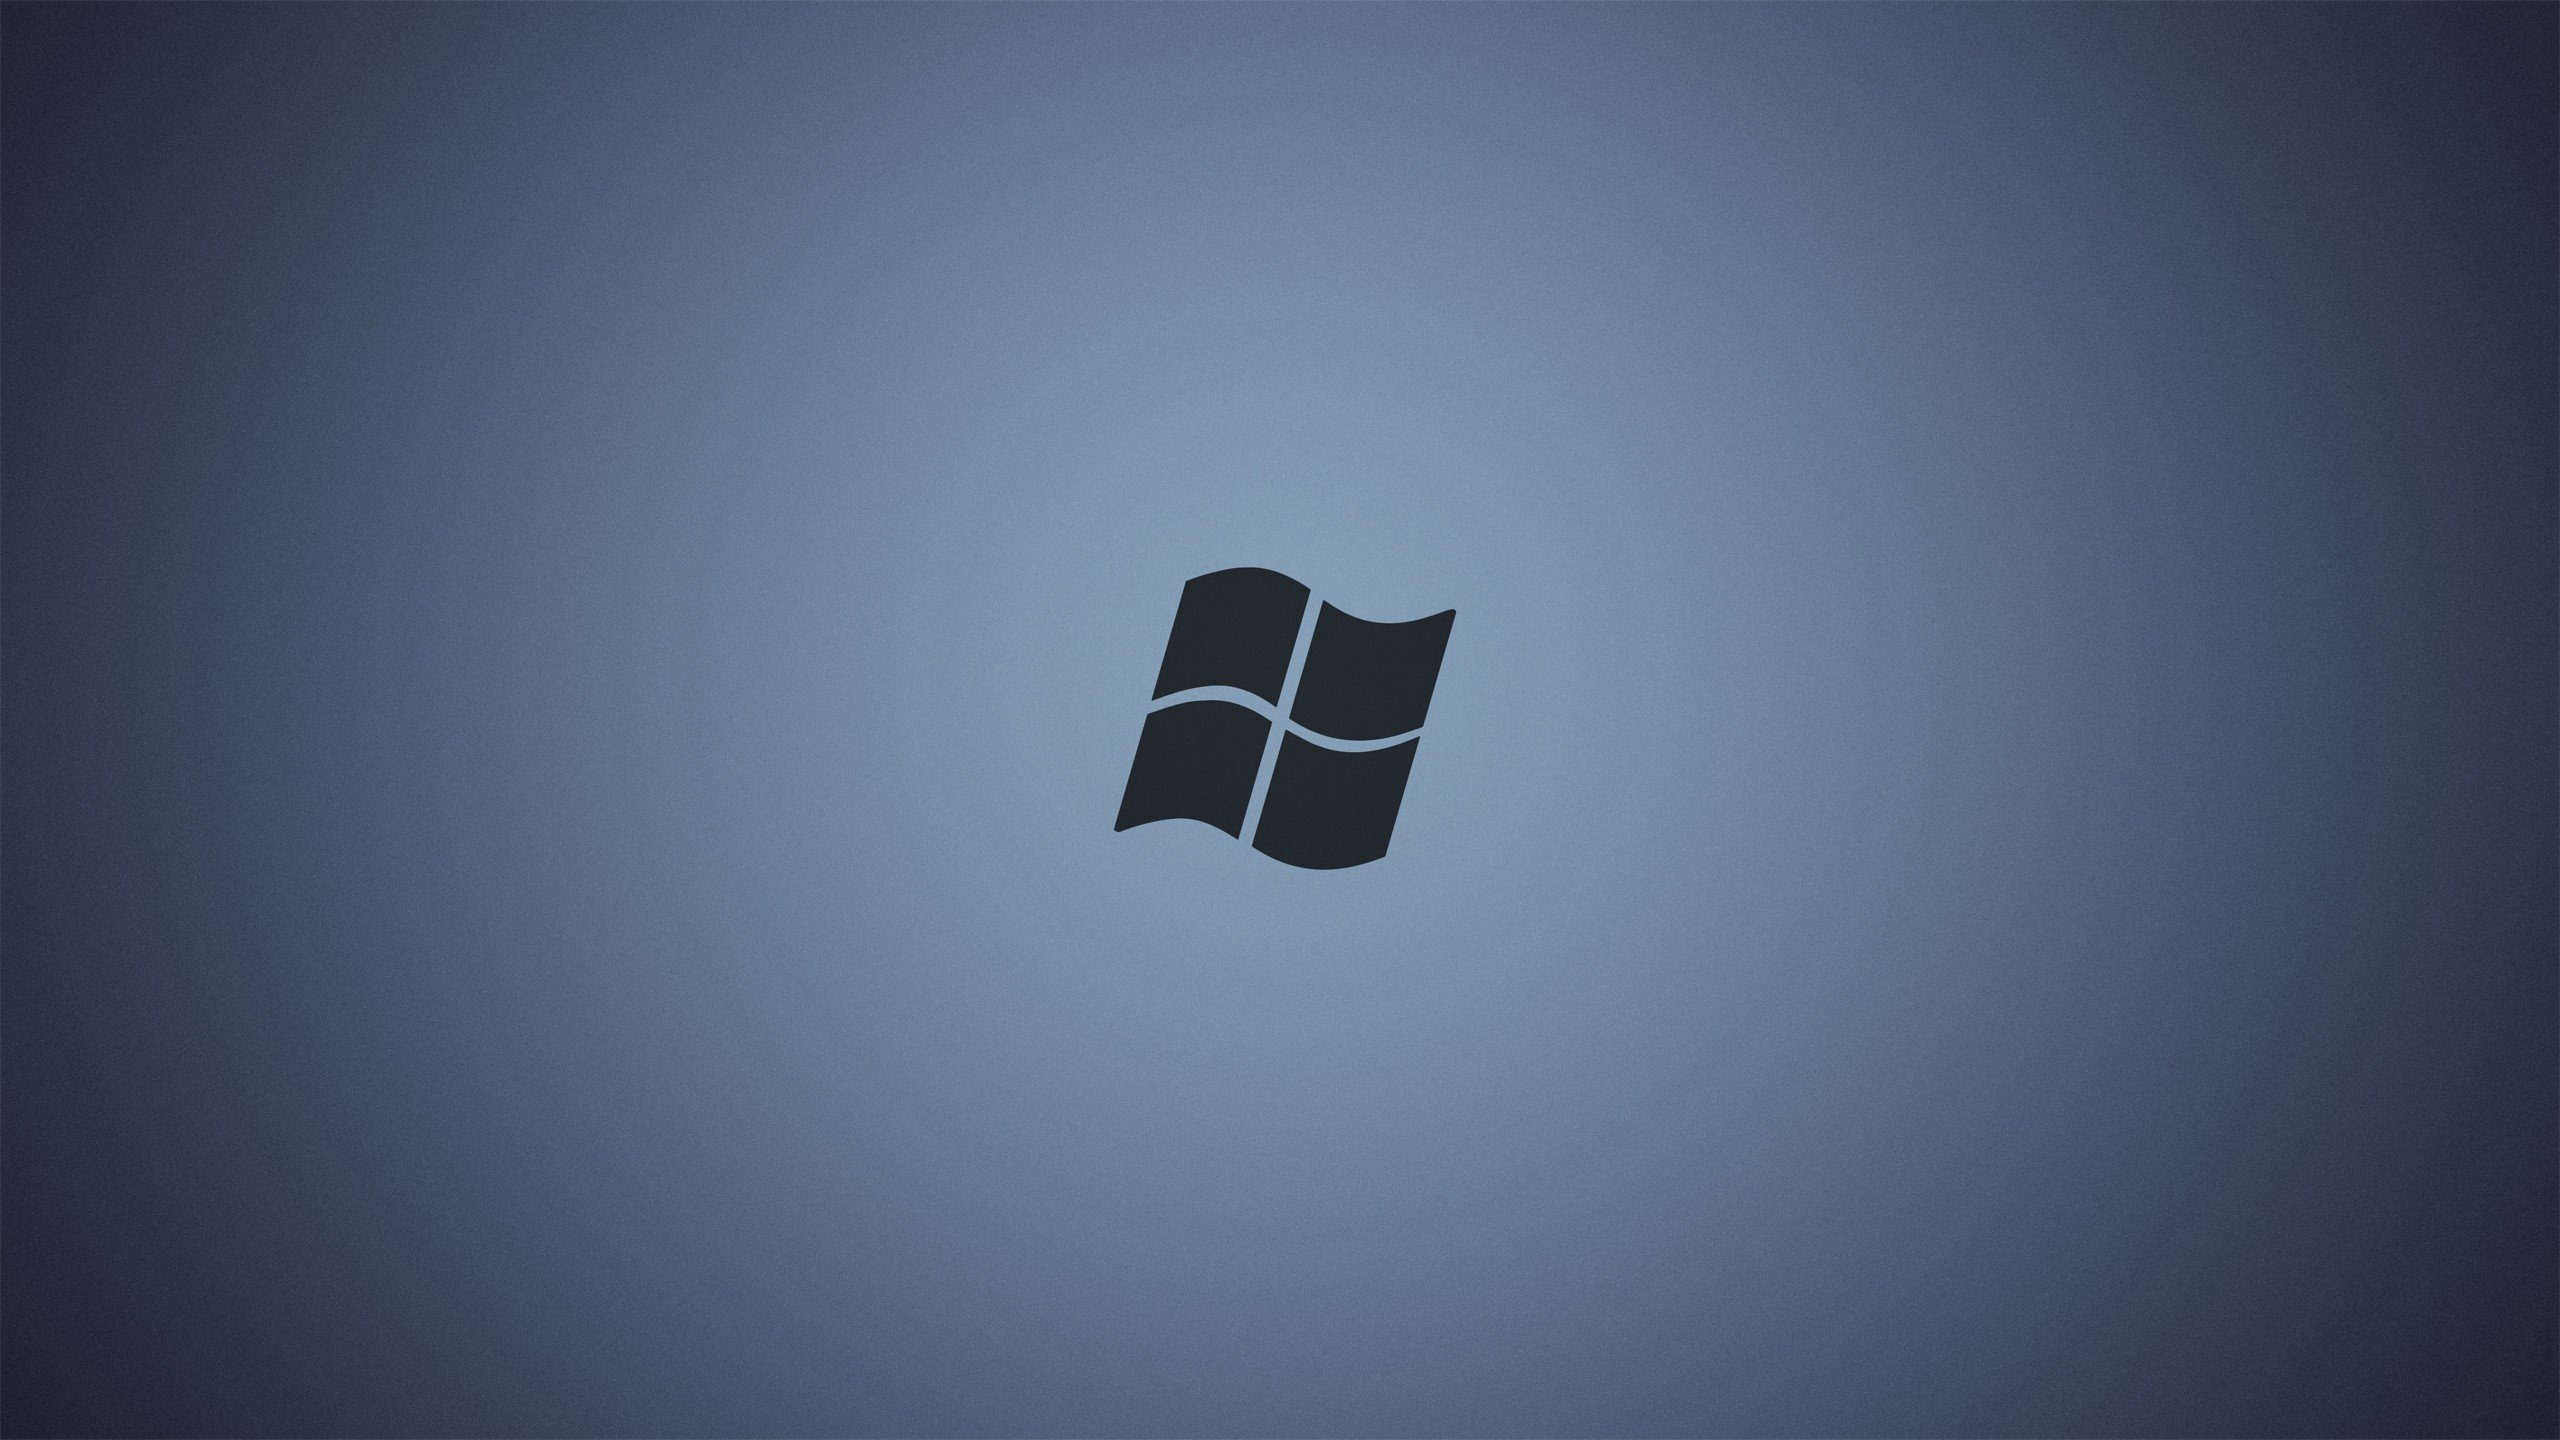 Windows 10 Wallpapers HD / Desktop and Mobile Backgrounds